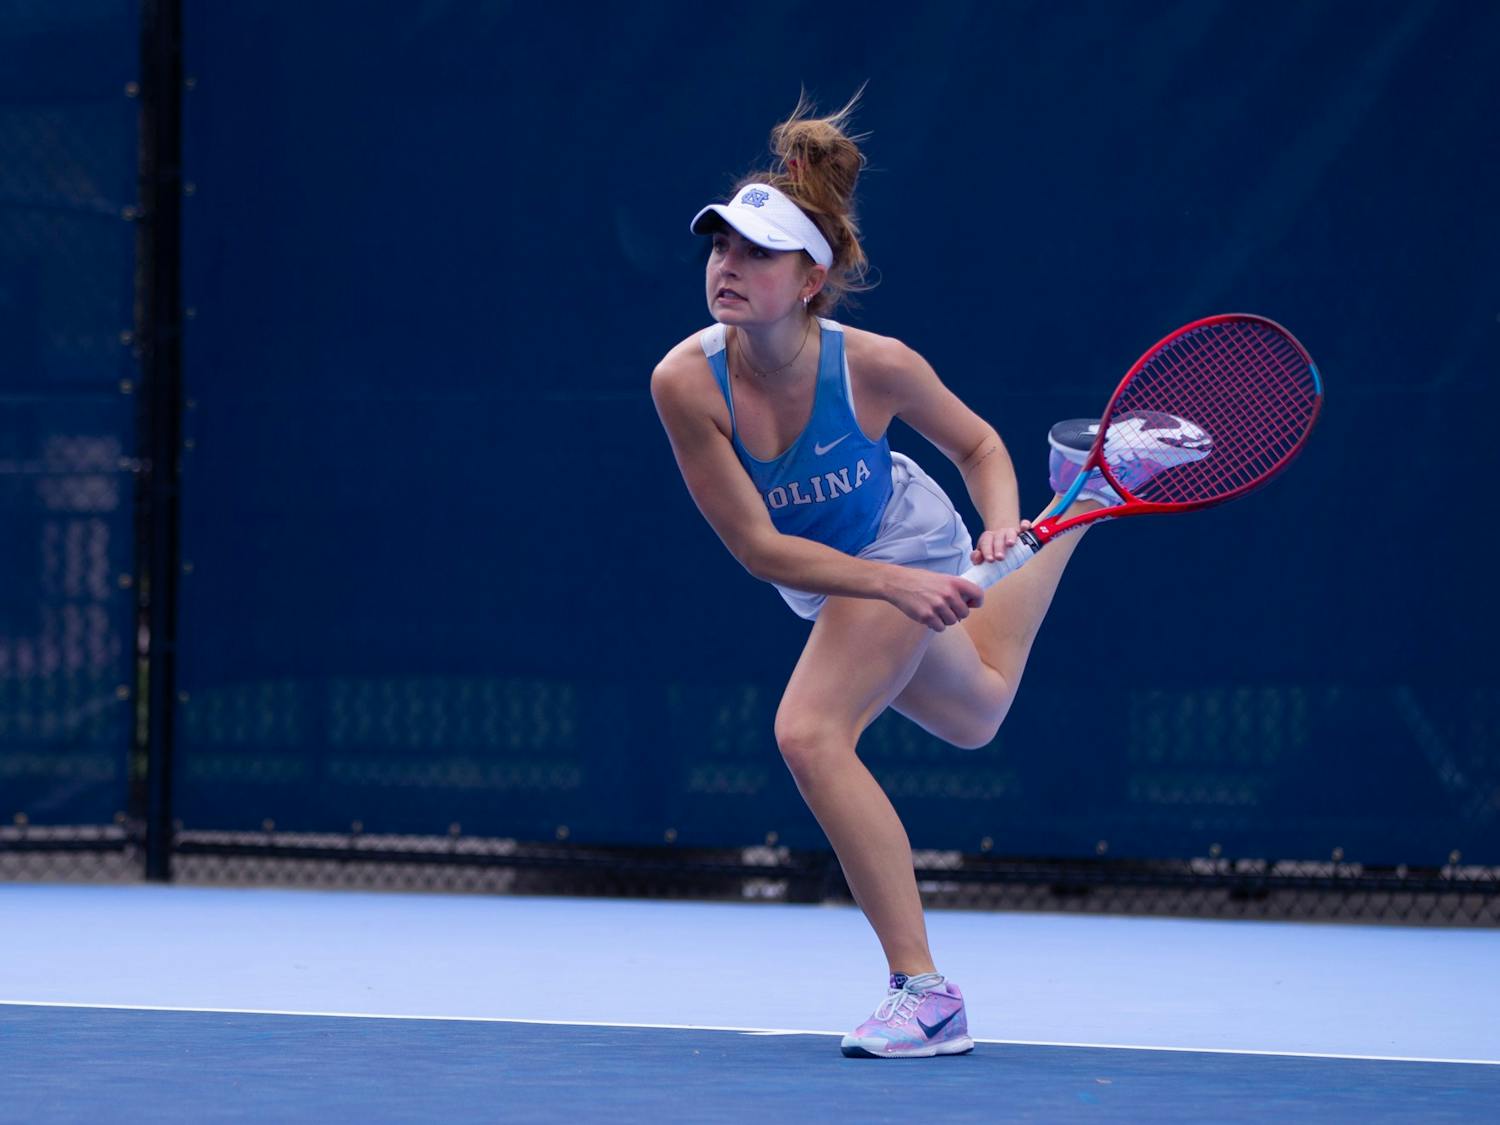 UNC junior Fiona Crawley serves during a match against Florida State University at the Cone-Kenfield Tennis Center on Friday, March 31, 2023. The Tar Heels won 6-1.